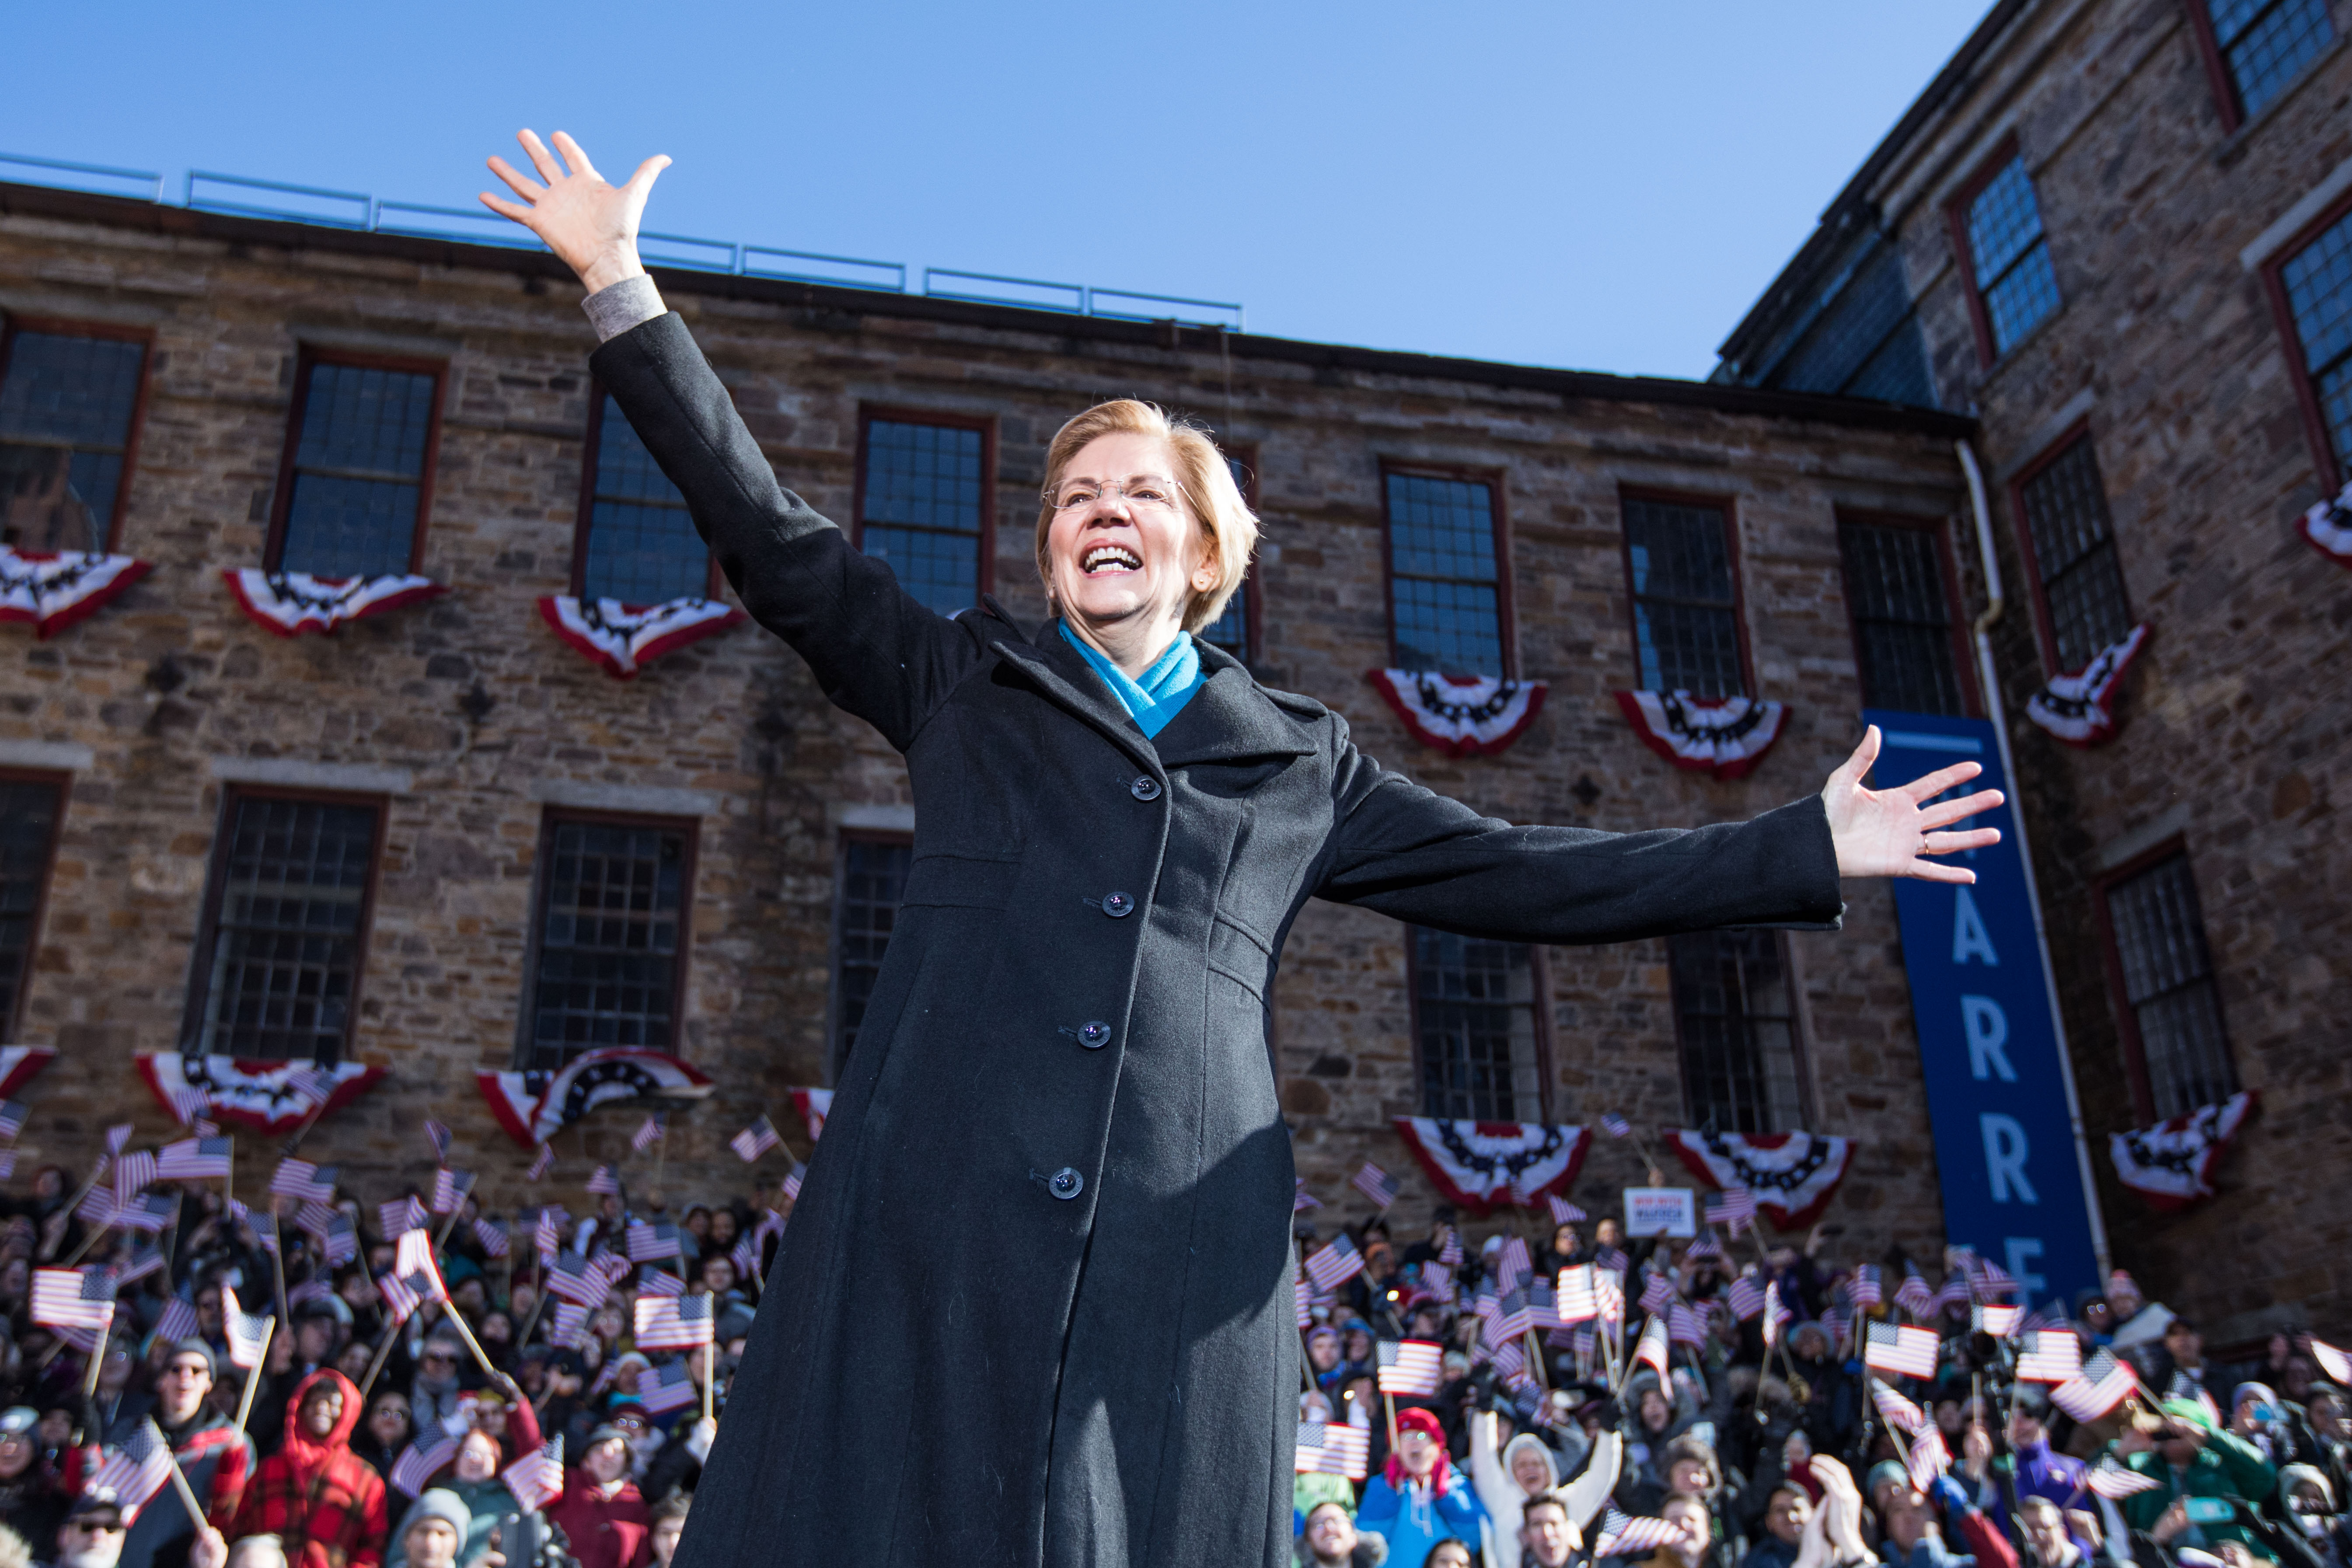 Sen. Elizabeth Warren (D-MA), announces her official bid for President on February 9, 2019 in Lawrence, Massachusetts. Warren announced today that she was launching her 2020 presidential campaign. (Photo by Scott Eisen/Getty Images)